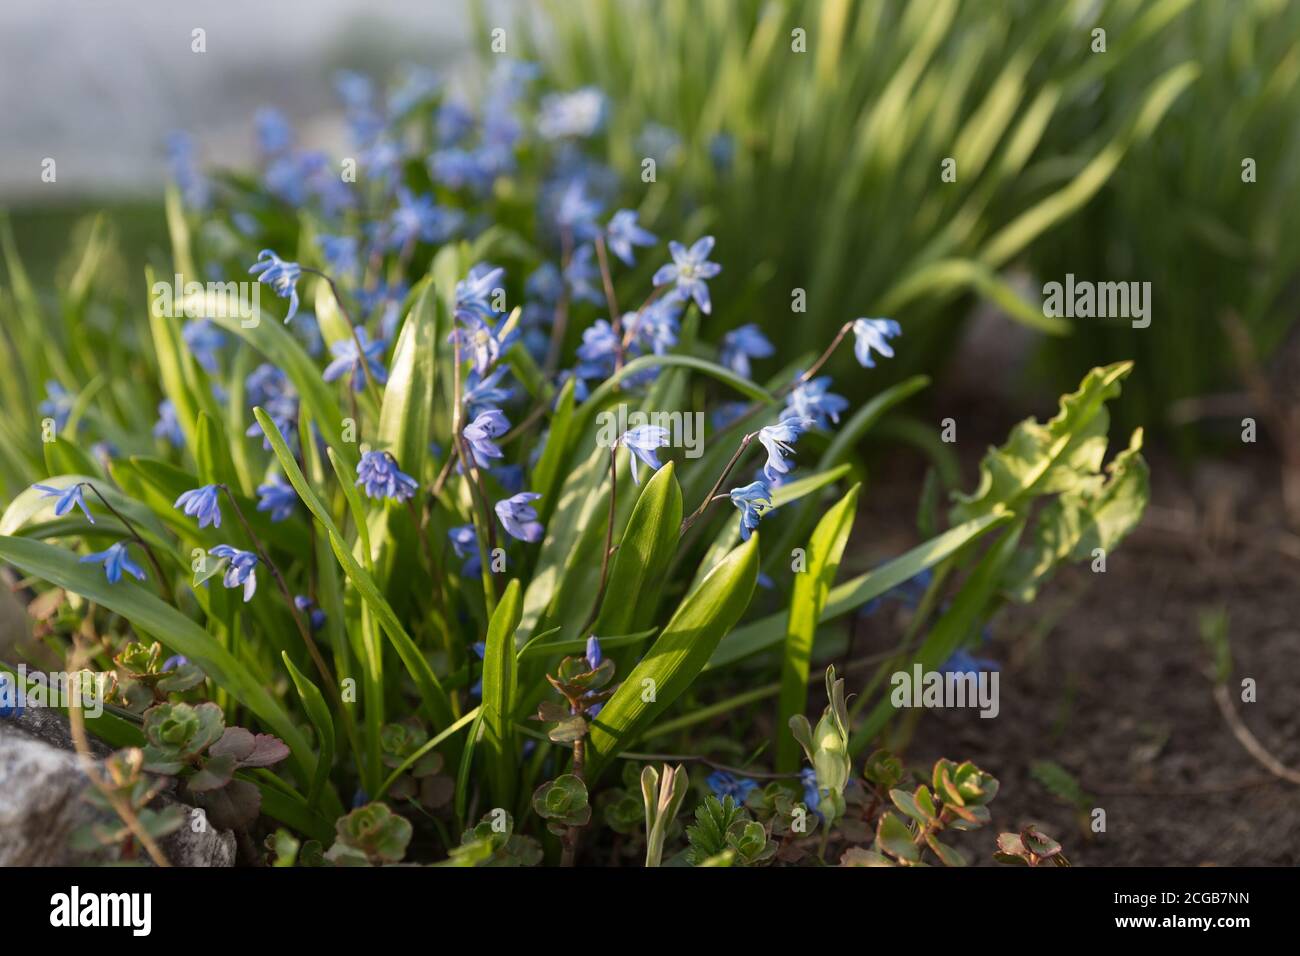 Perennial, herbaceous, bulbous plant Siberian Scilla (Latin Scilla siberica) blooms in early spring. Stock Photo